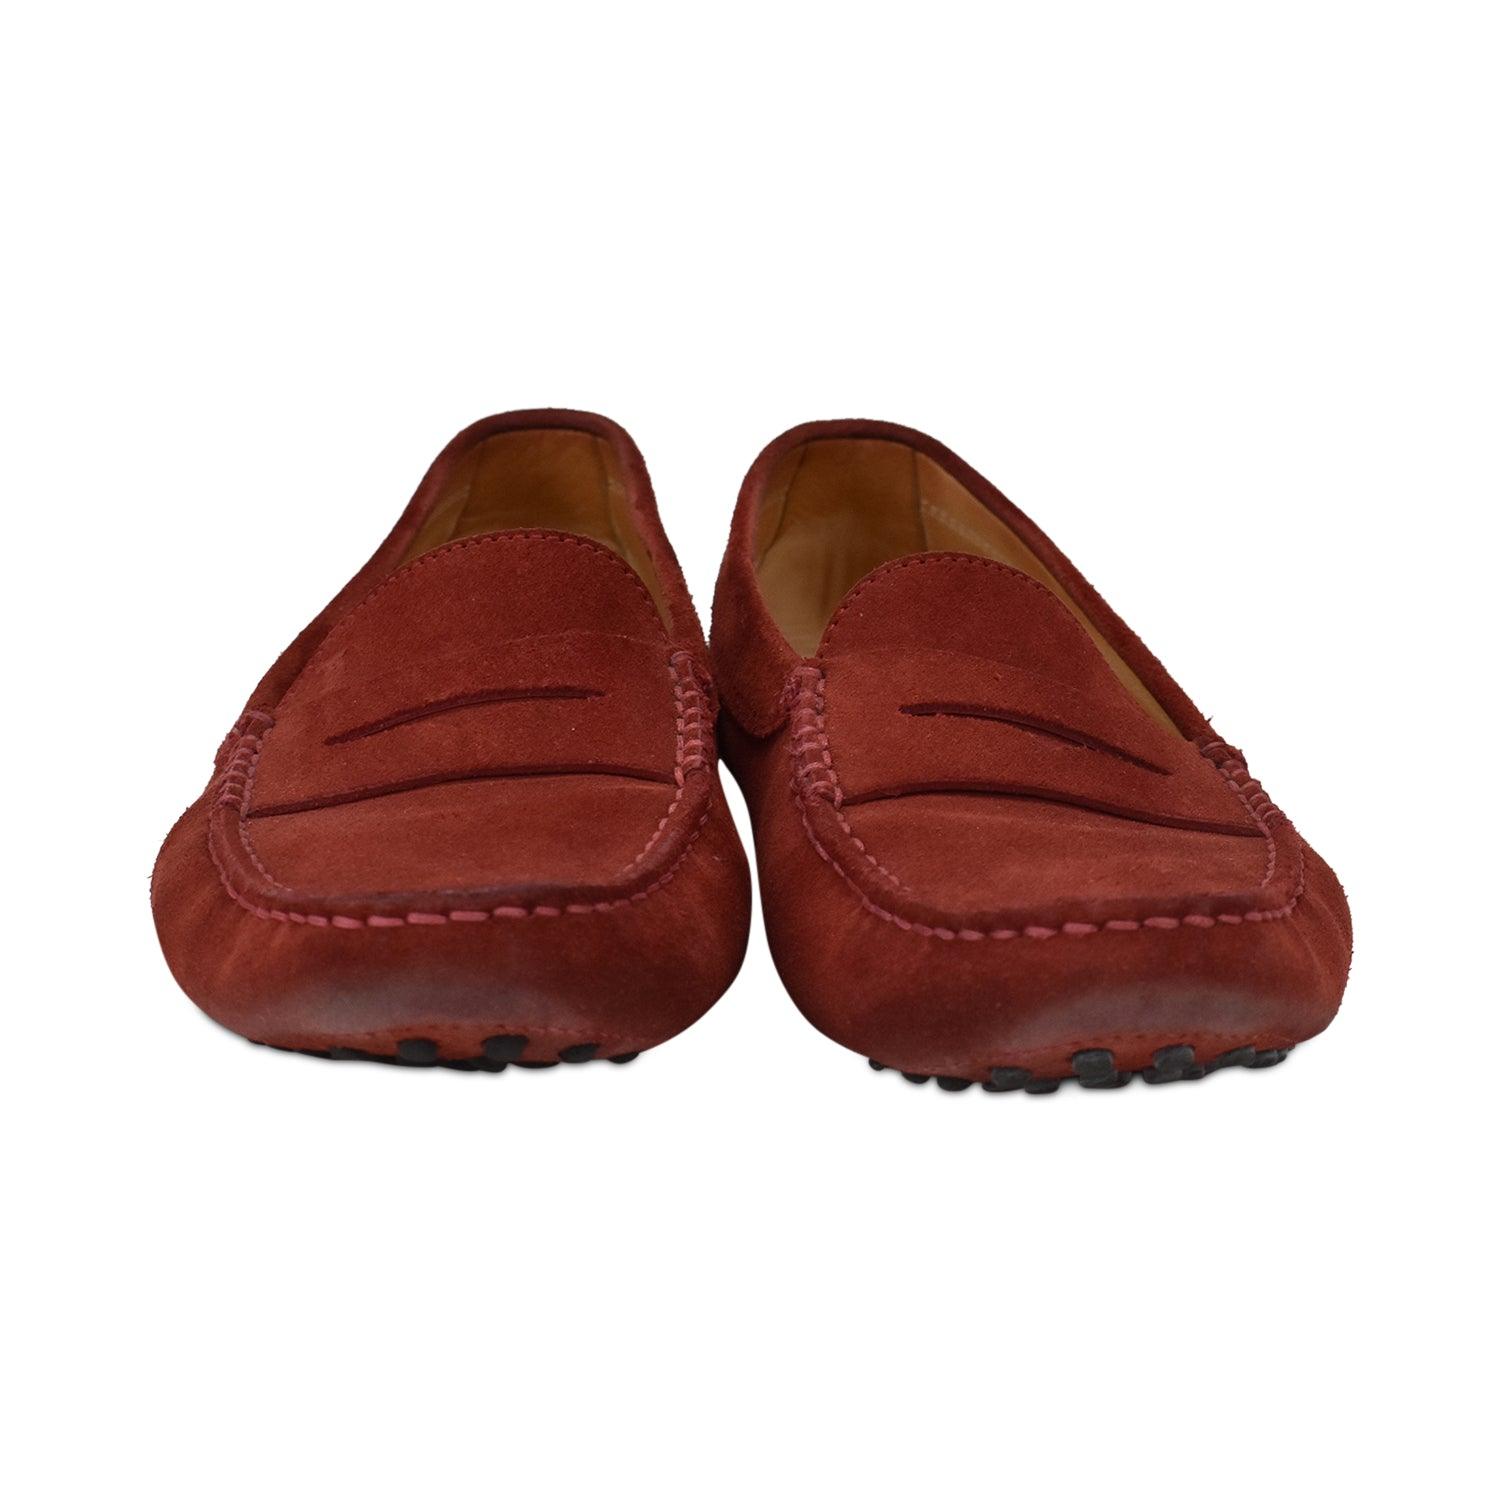 Tod's Loafer - Women's 39.5 - Fashionably Yours